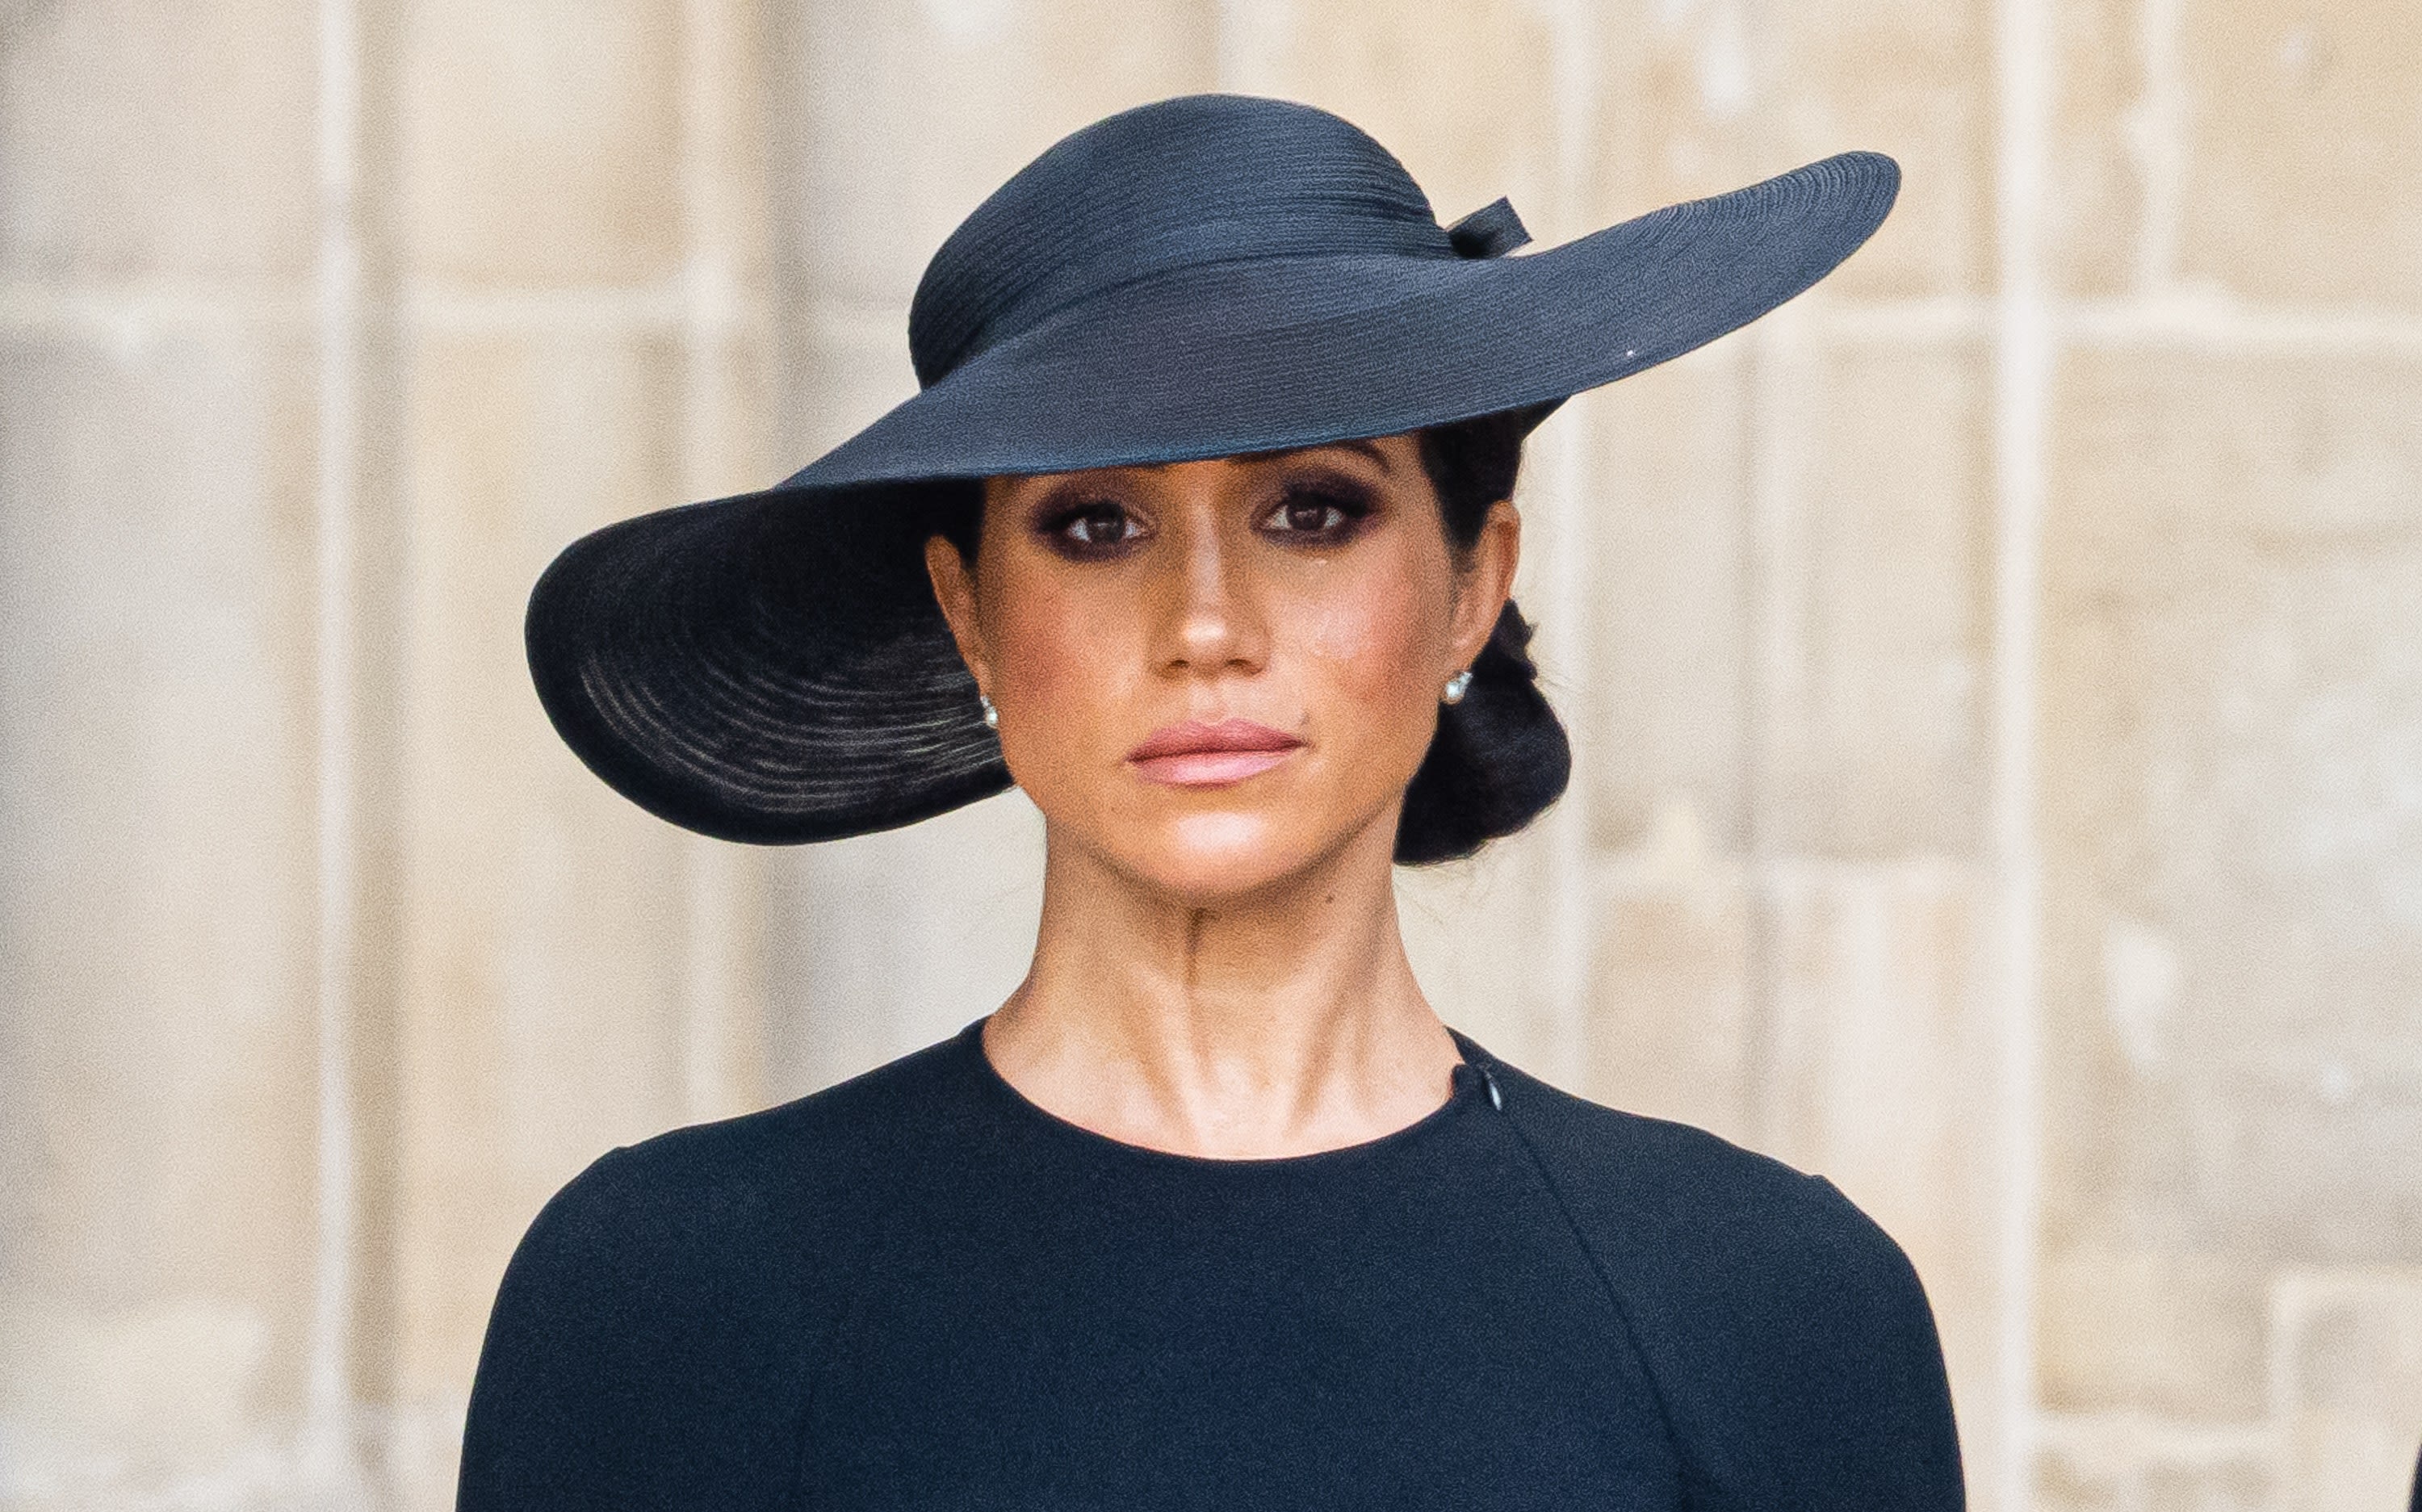 Meghan Markle would become 'Princess Henry' if stripped of royal title: expert